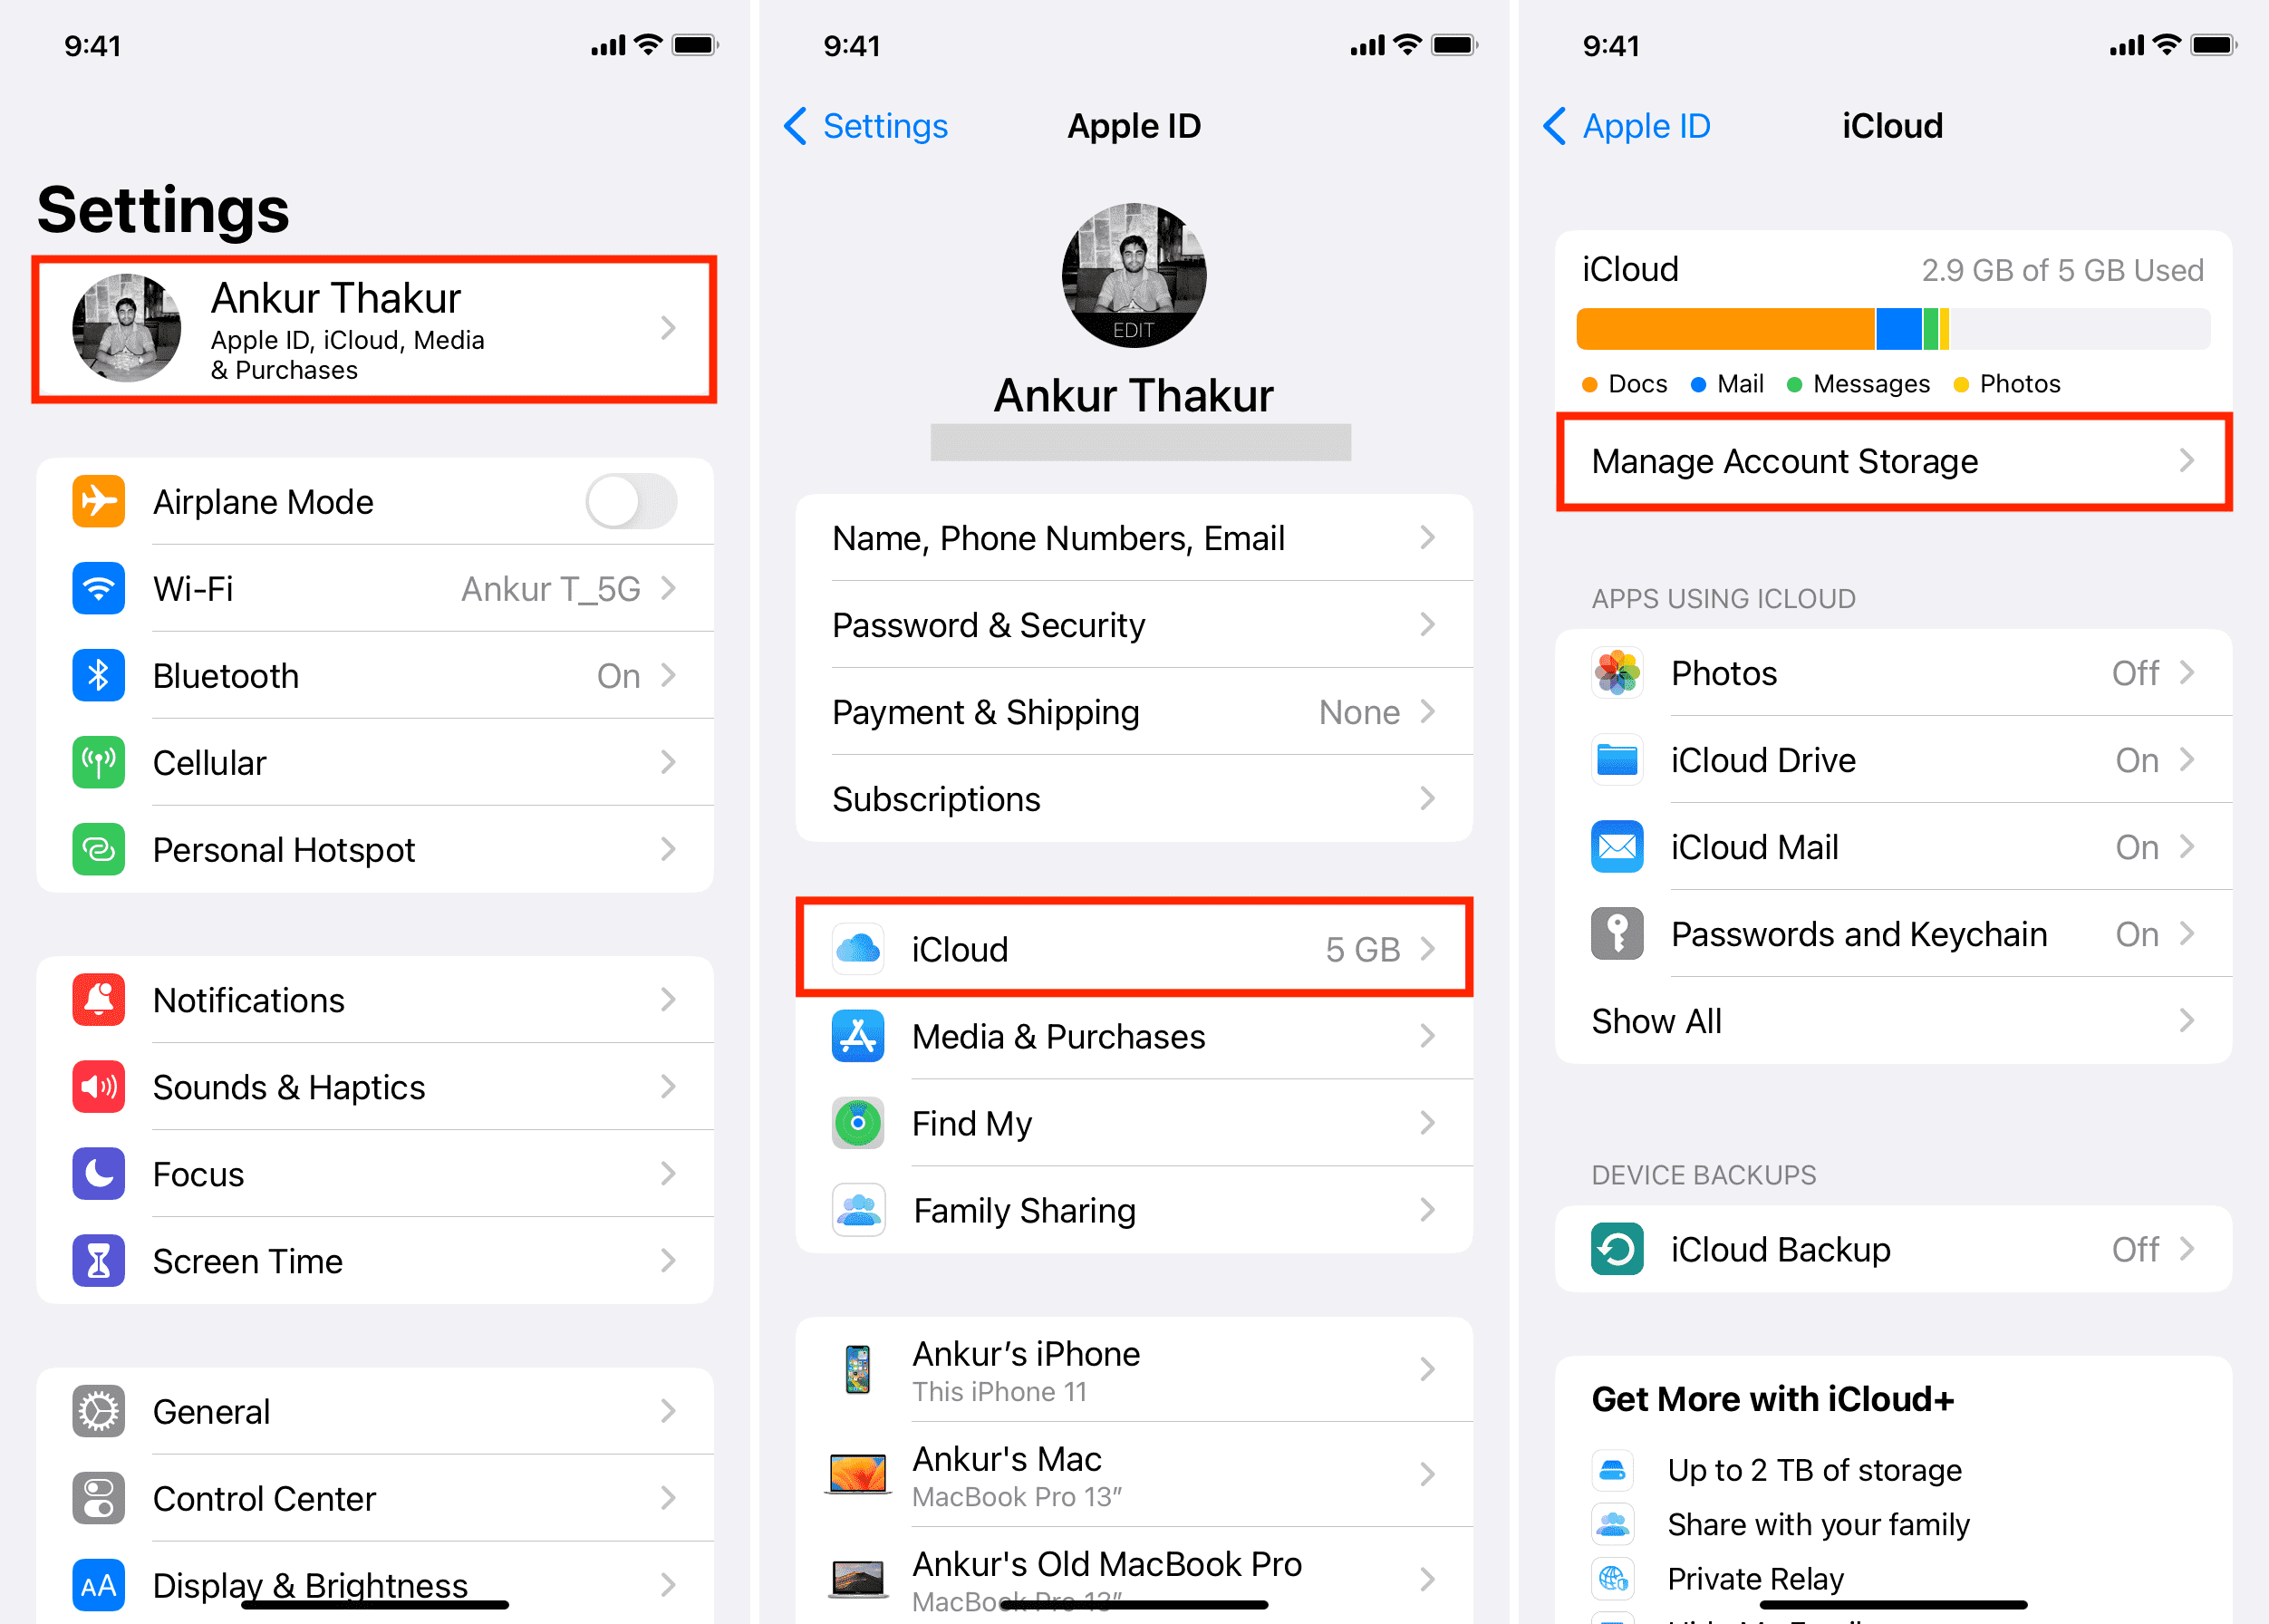 Manage Account Storage for iCloud on iPhone